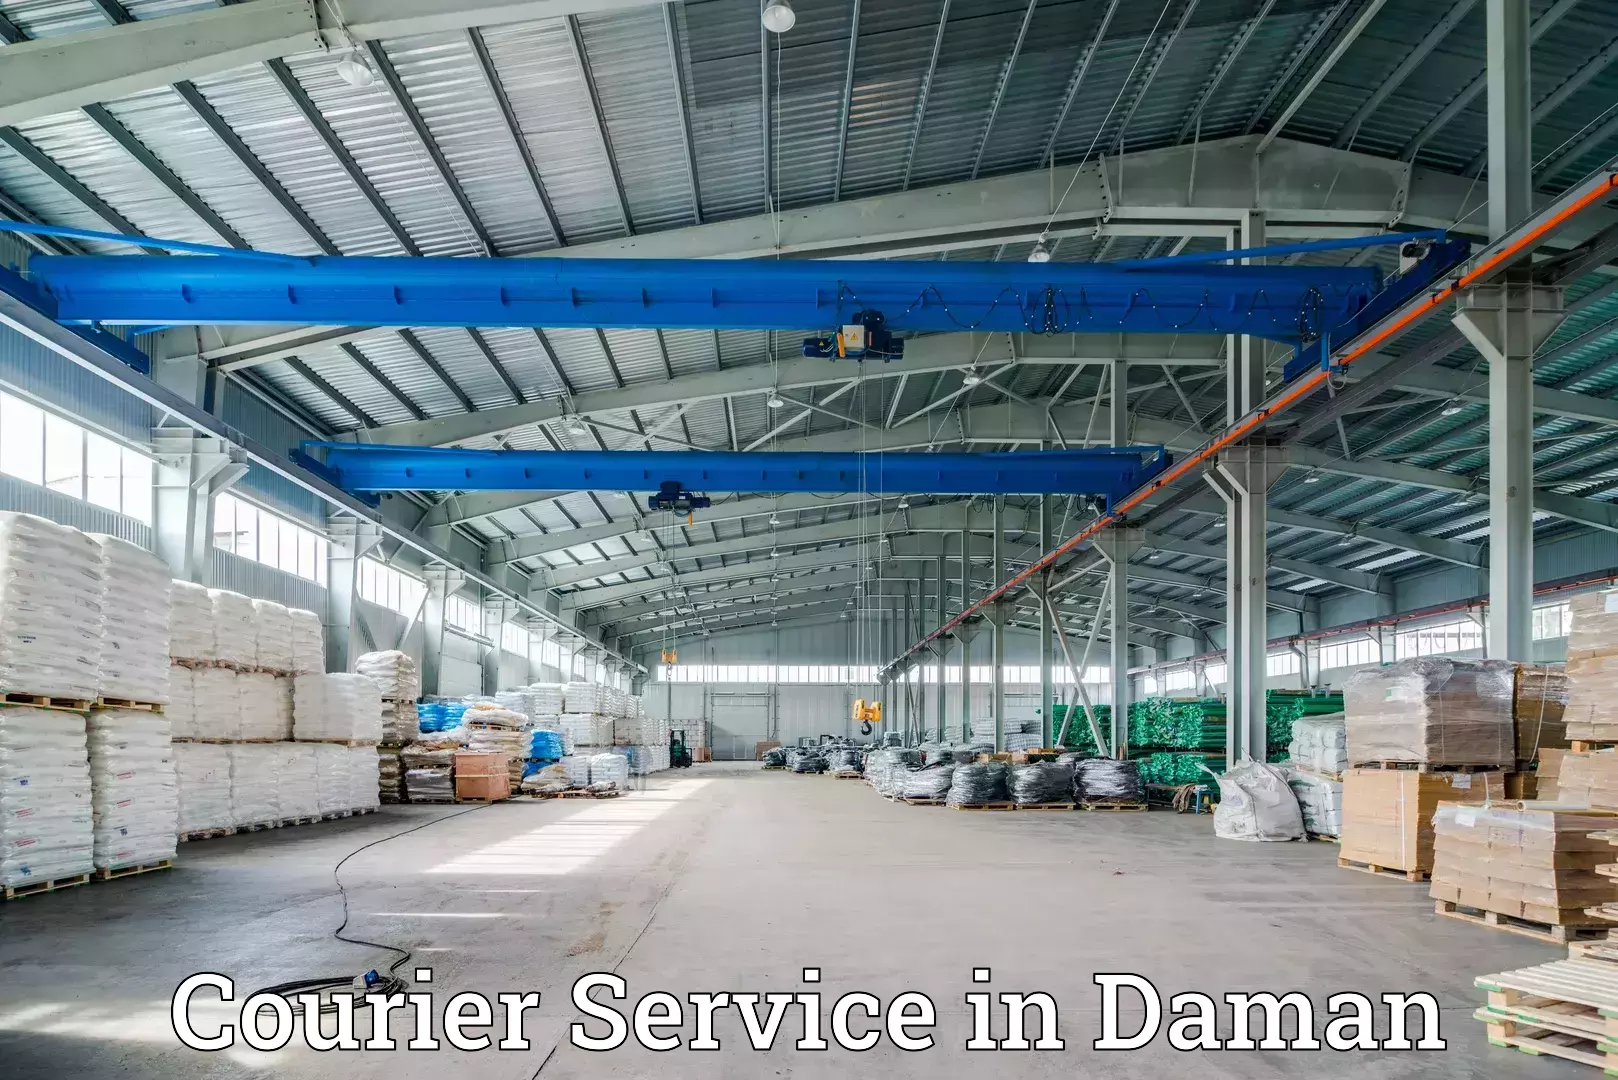 Sustainable delivery practices in Daman